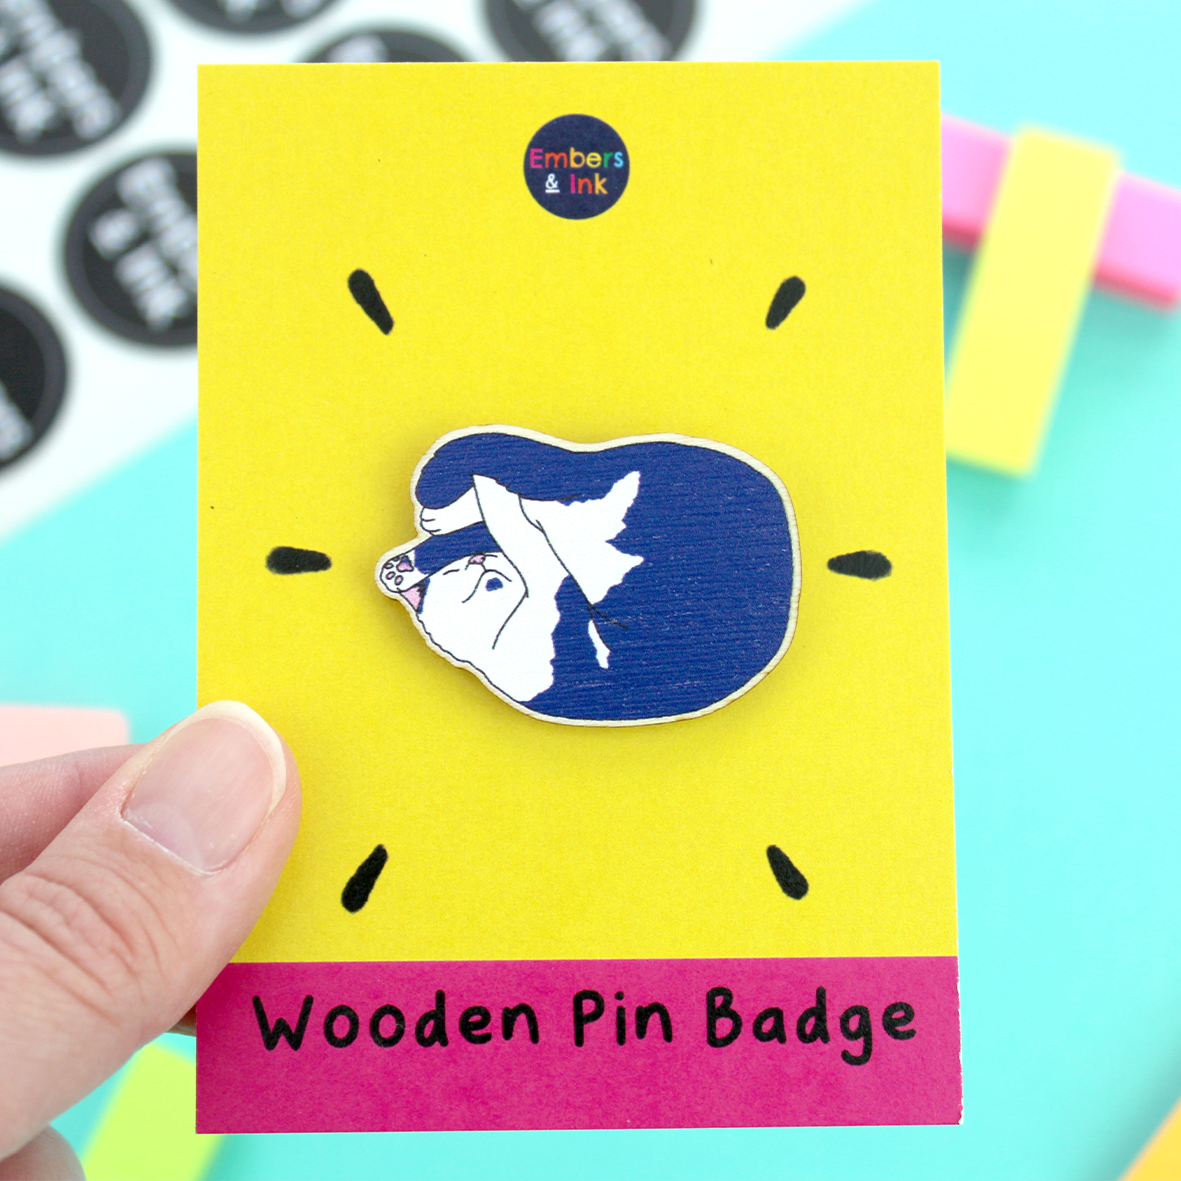 A hand holds the wooden cat pin badge attached to its cardboard backer. The coardboard backer is yellow and pink. the pink section is at the bottom and holds the words 'wooden pin badge'